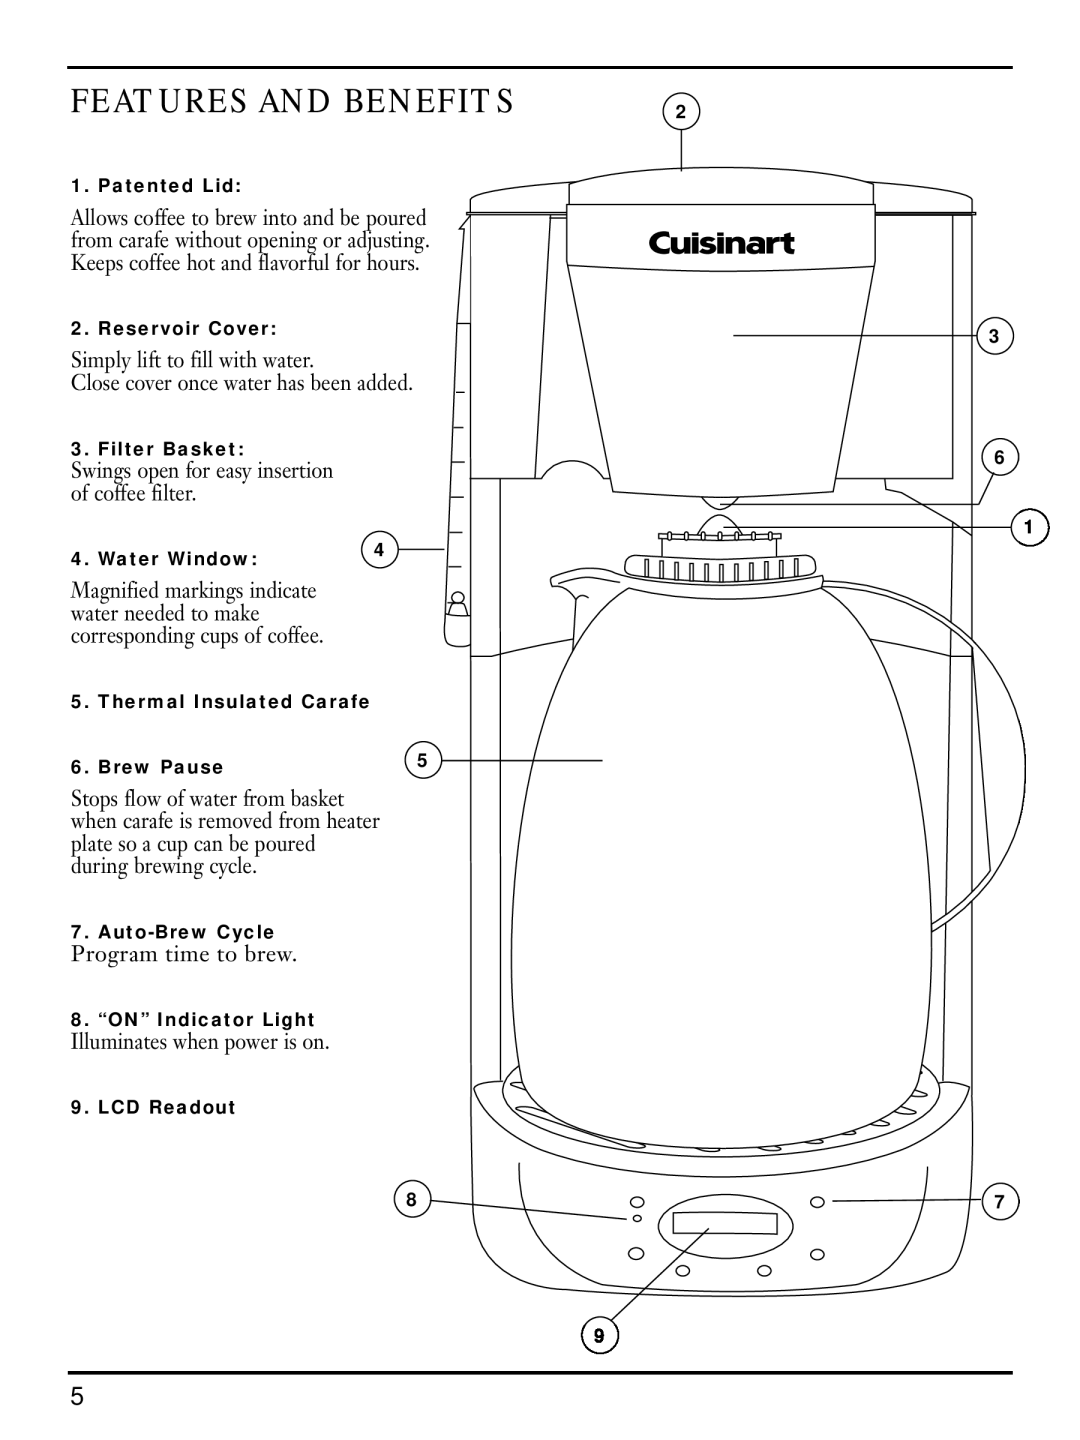 Cuisinart DTC-850 Series manual Features And Benefits 